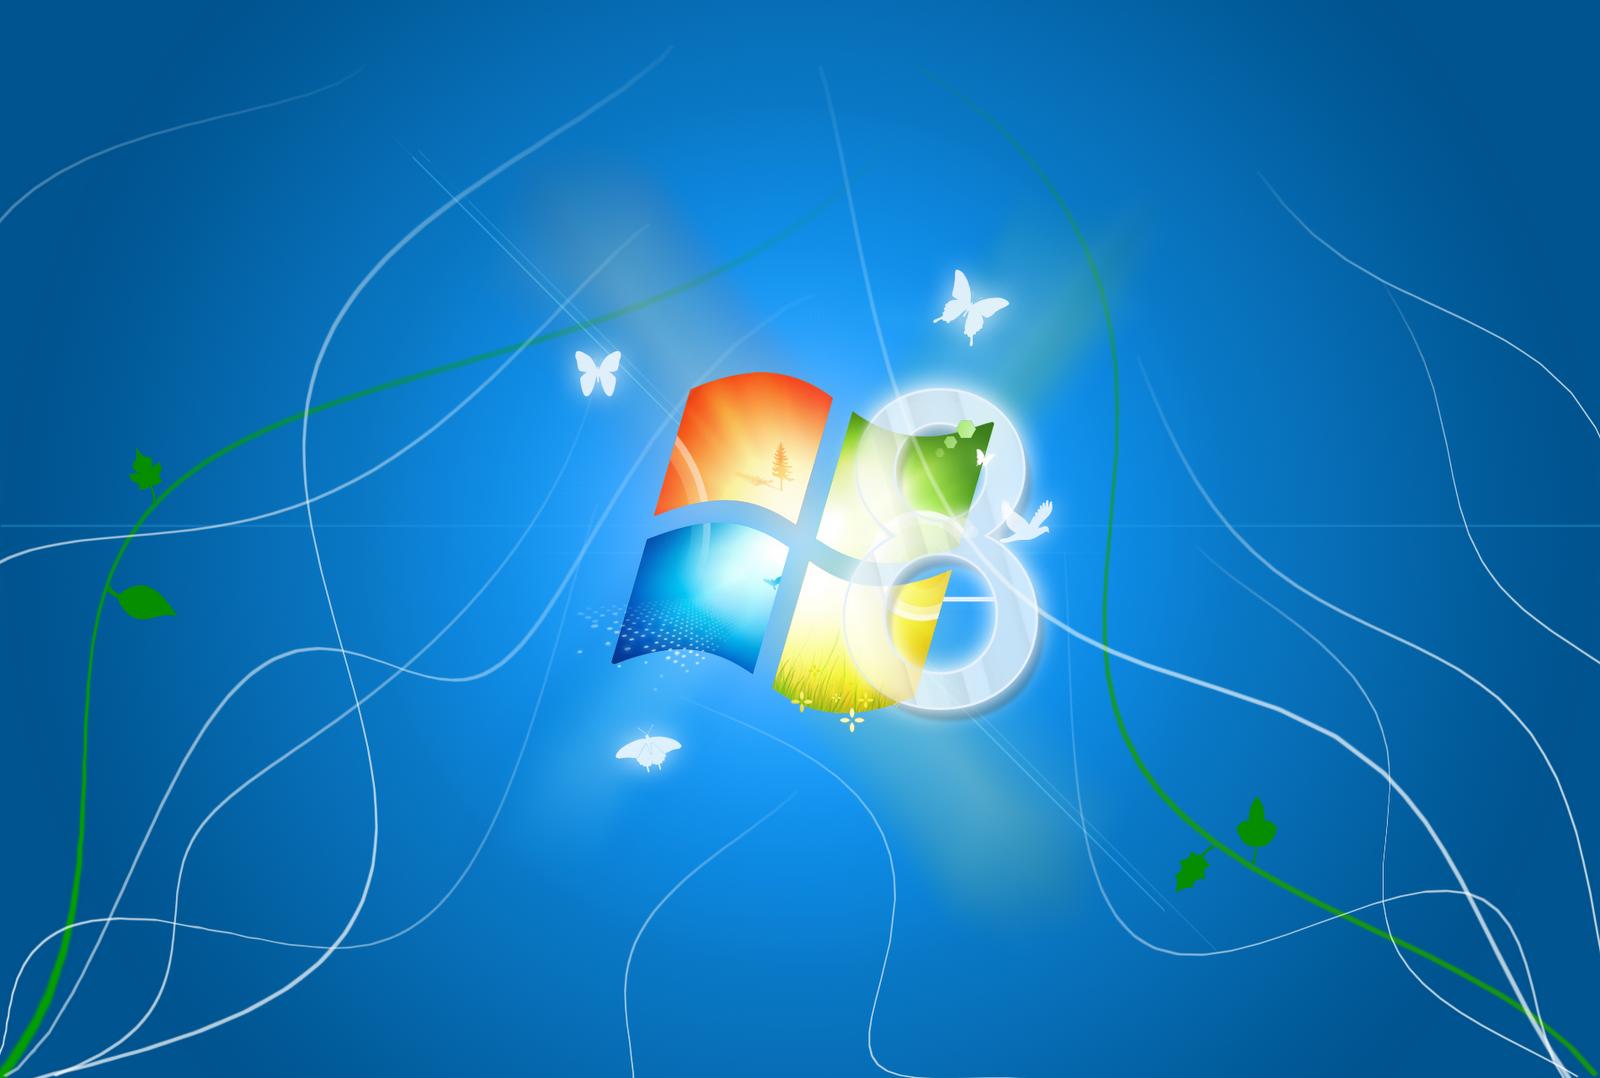 Windows 8 Wallpapers Windows 8 Official Wallpapers Windows 8